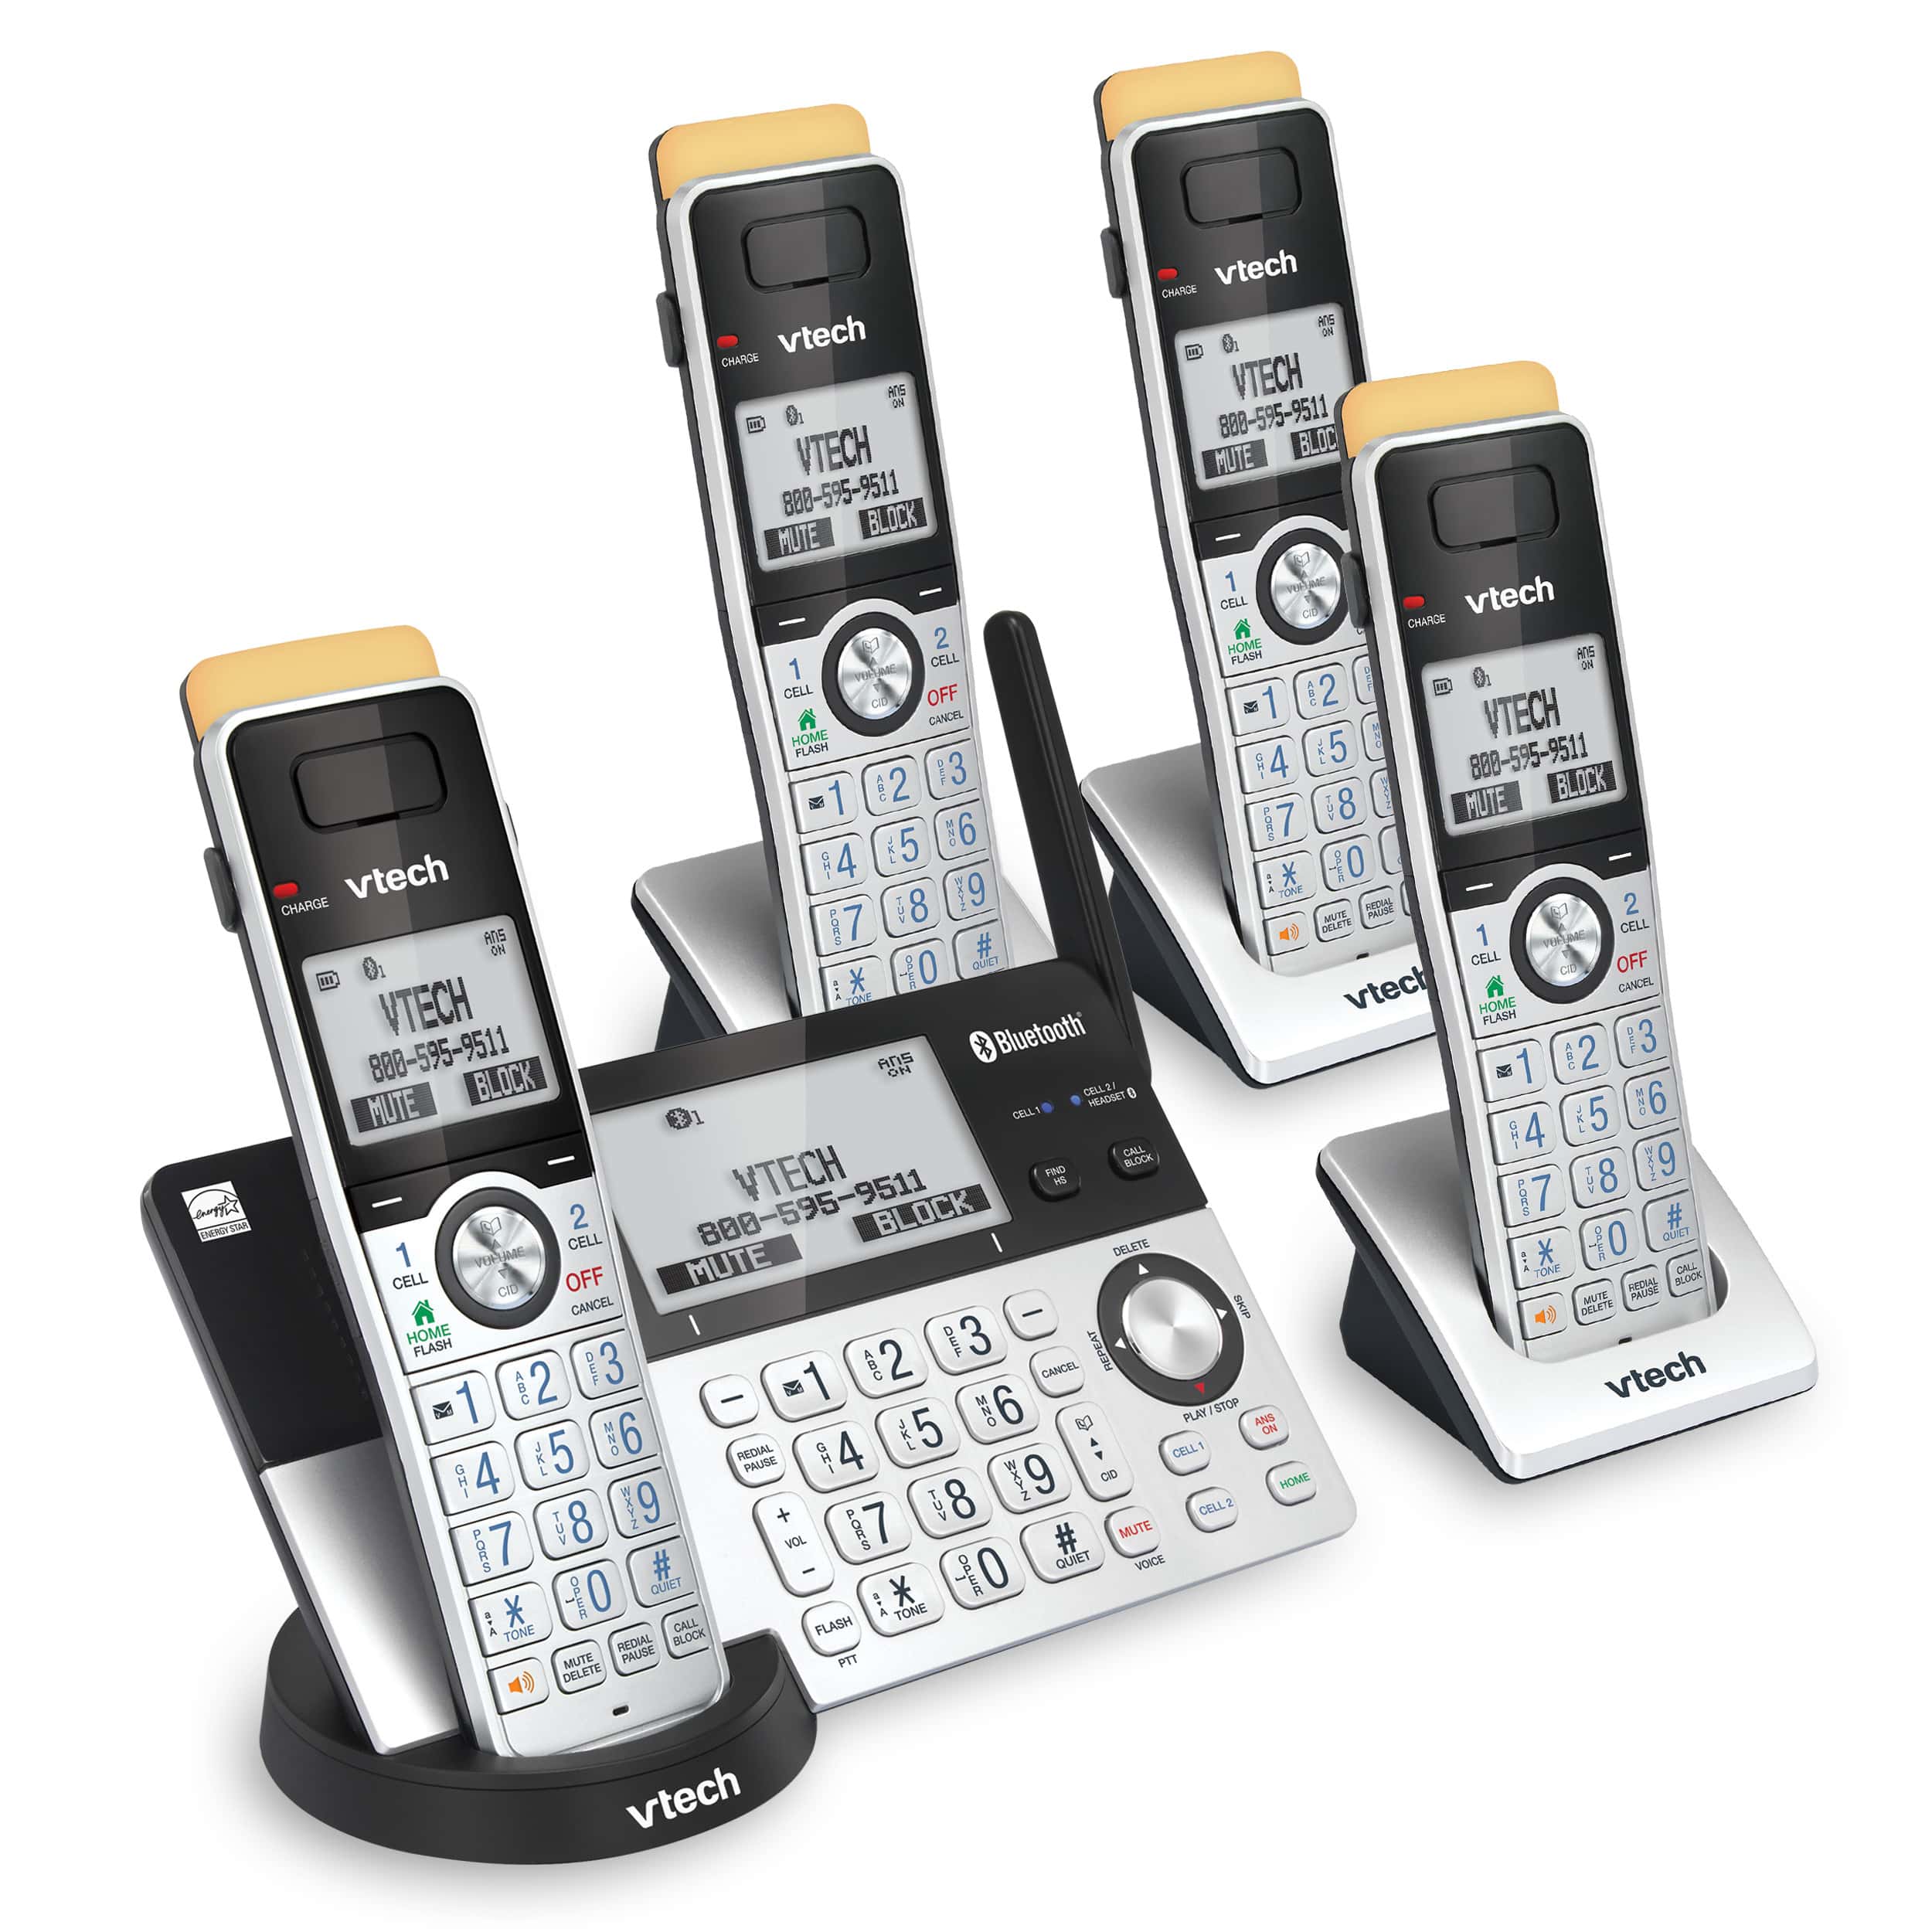 4-Handset Expandable Cordless Phone with Super Long Range, Bluetooth Connect to Cell, Smart Call Blocker and Answering System, IS8151-4